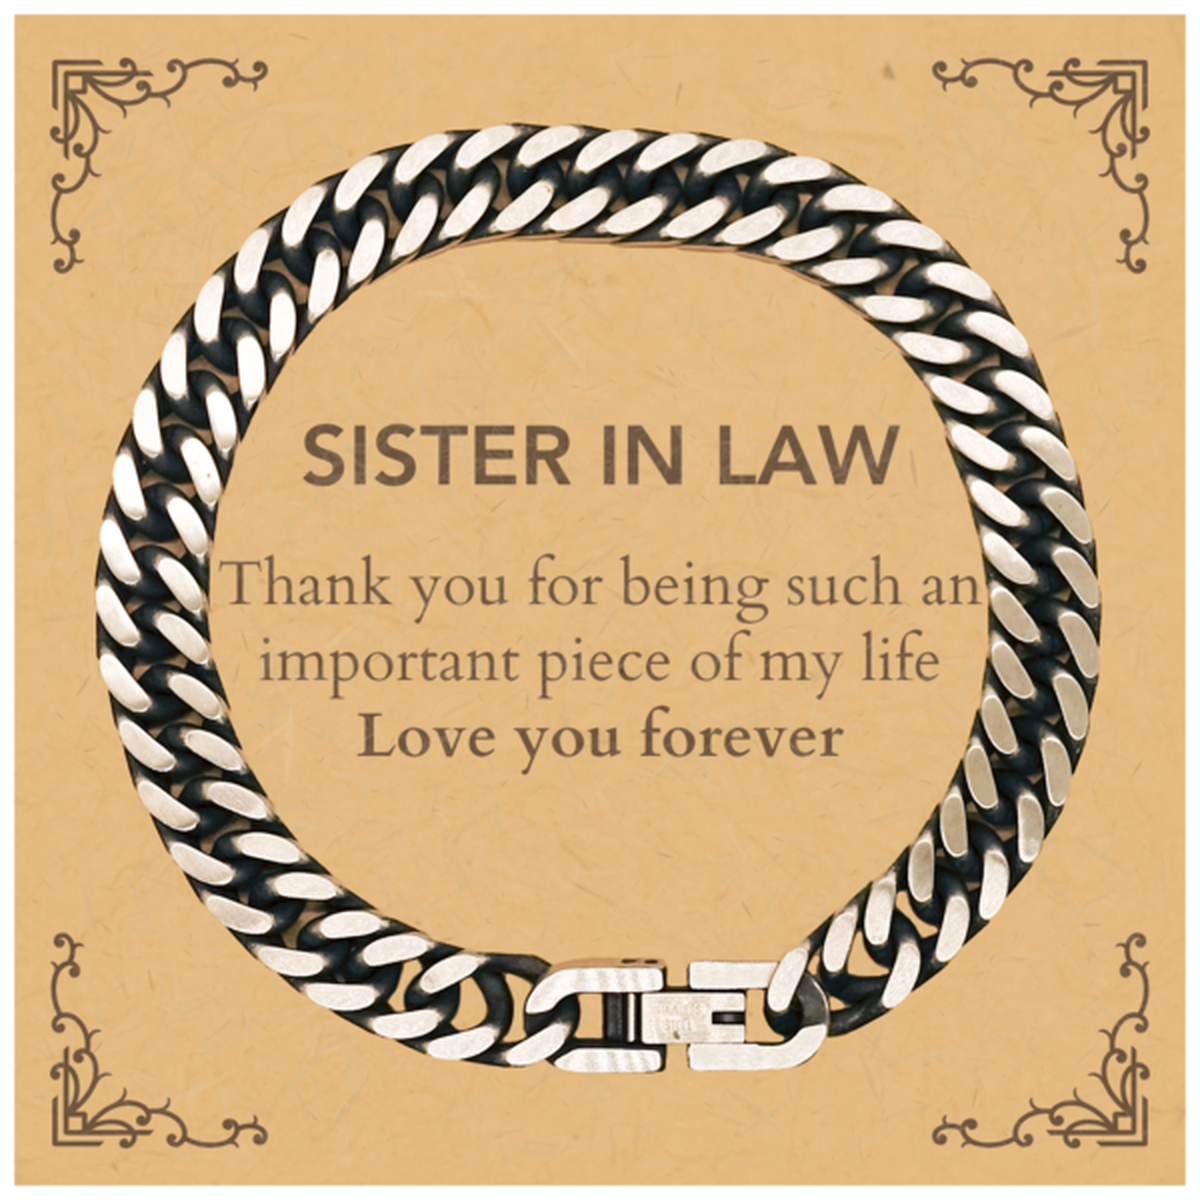 Appropriate Sister In Law Cuban Link Chain Bracelet Epic Birthday Gifts for Sister In Law Thank you for being such an important piece of my life Sister In Law Christmas Mothers Fathers Day